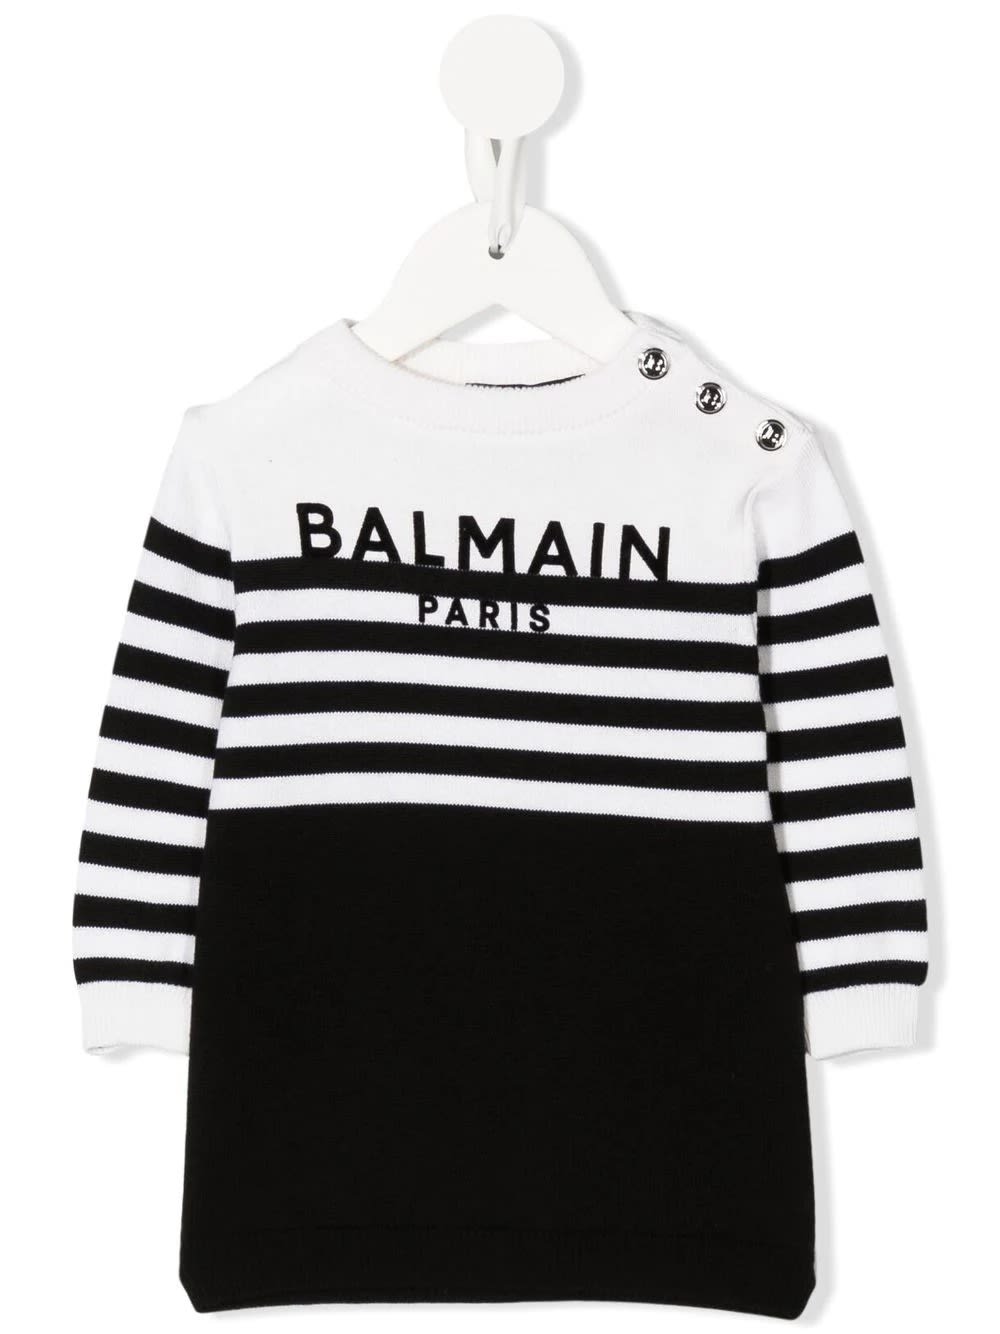 Balmain Baby Dress In White And Black Knit With Logo And Striped Pattern